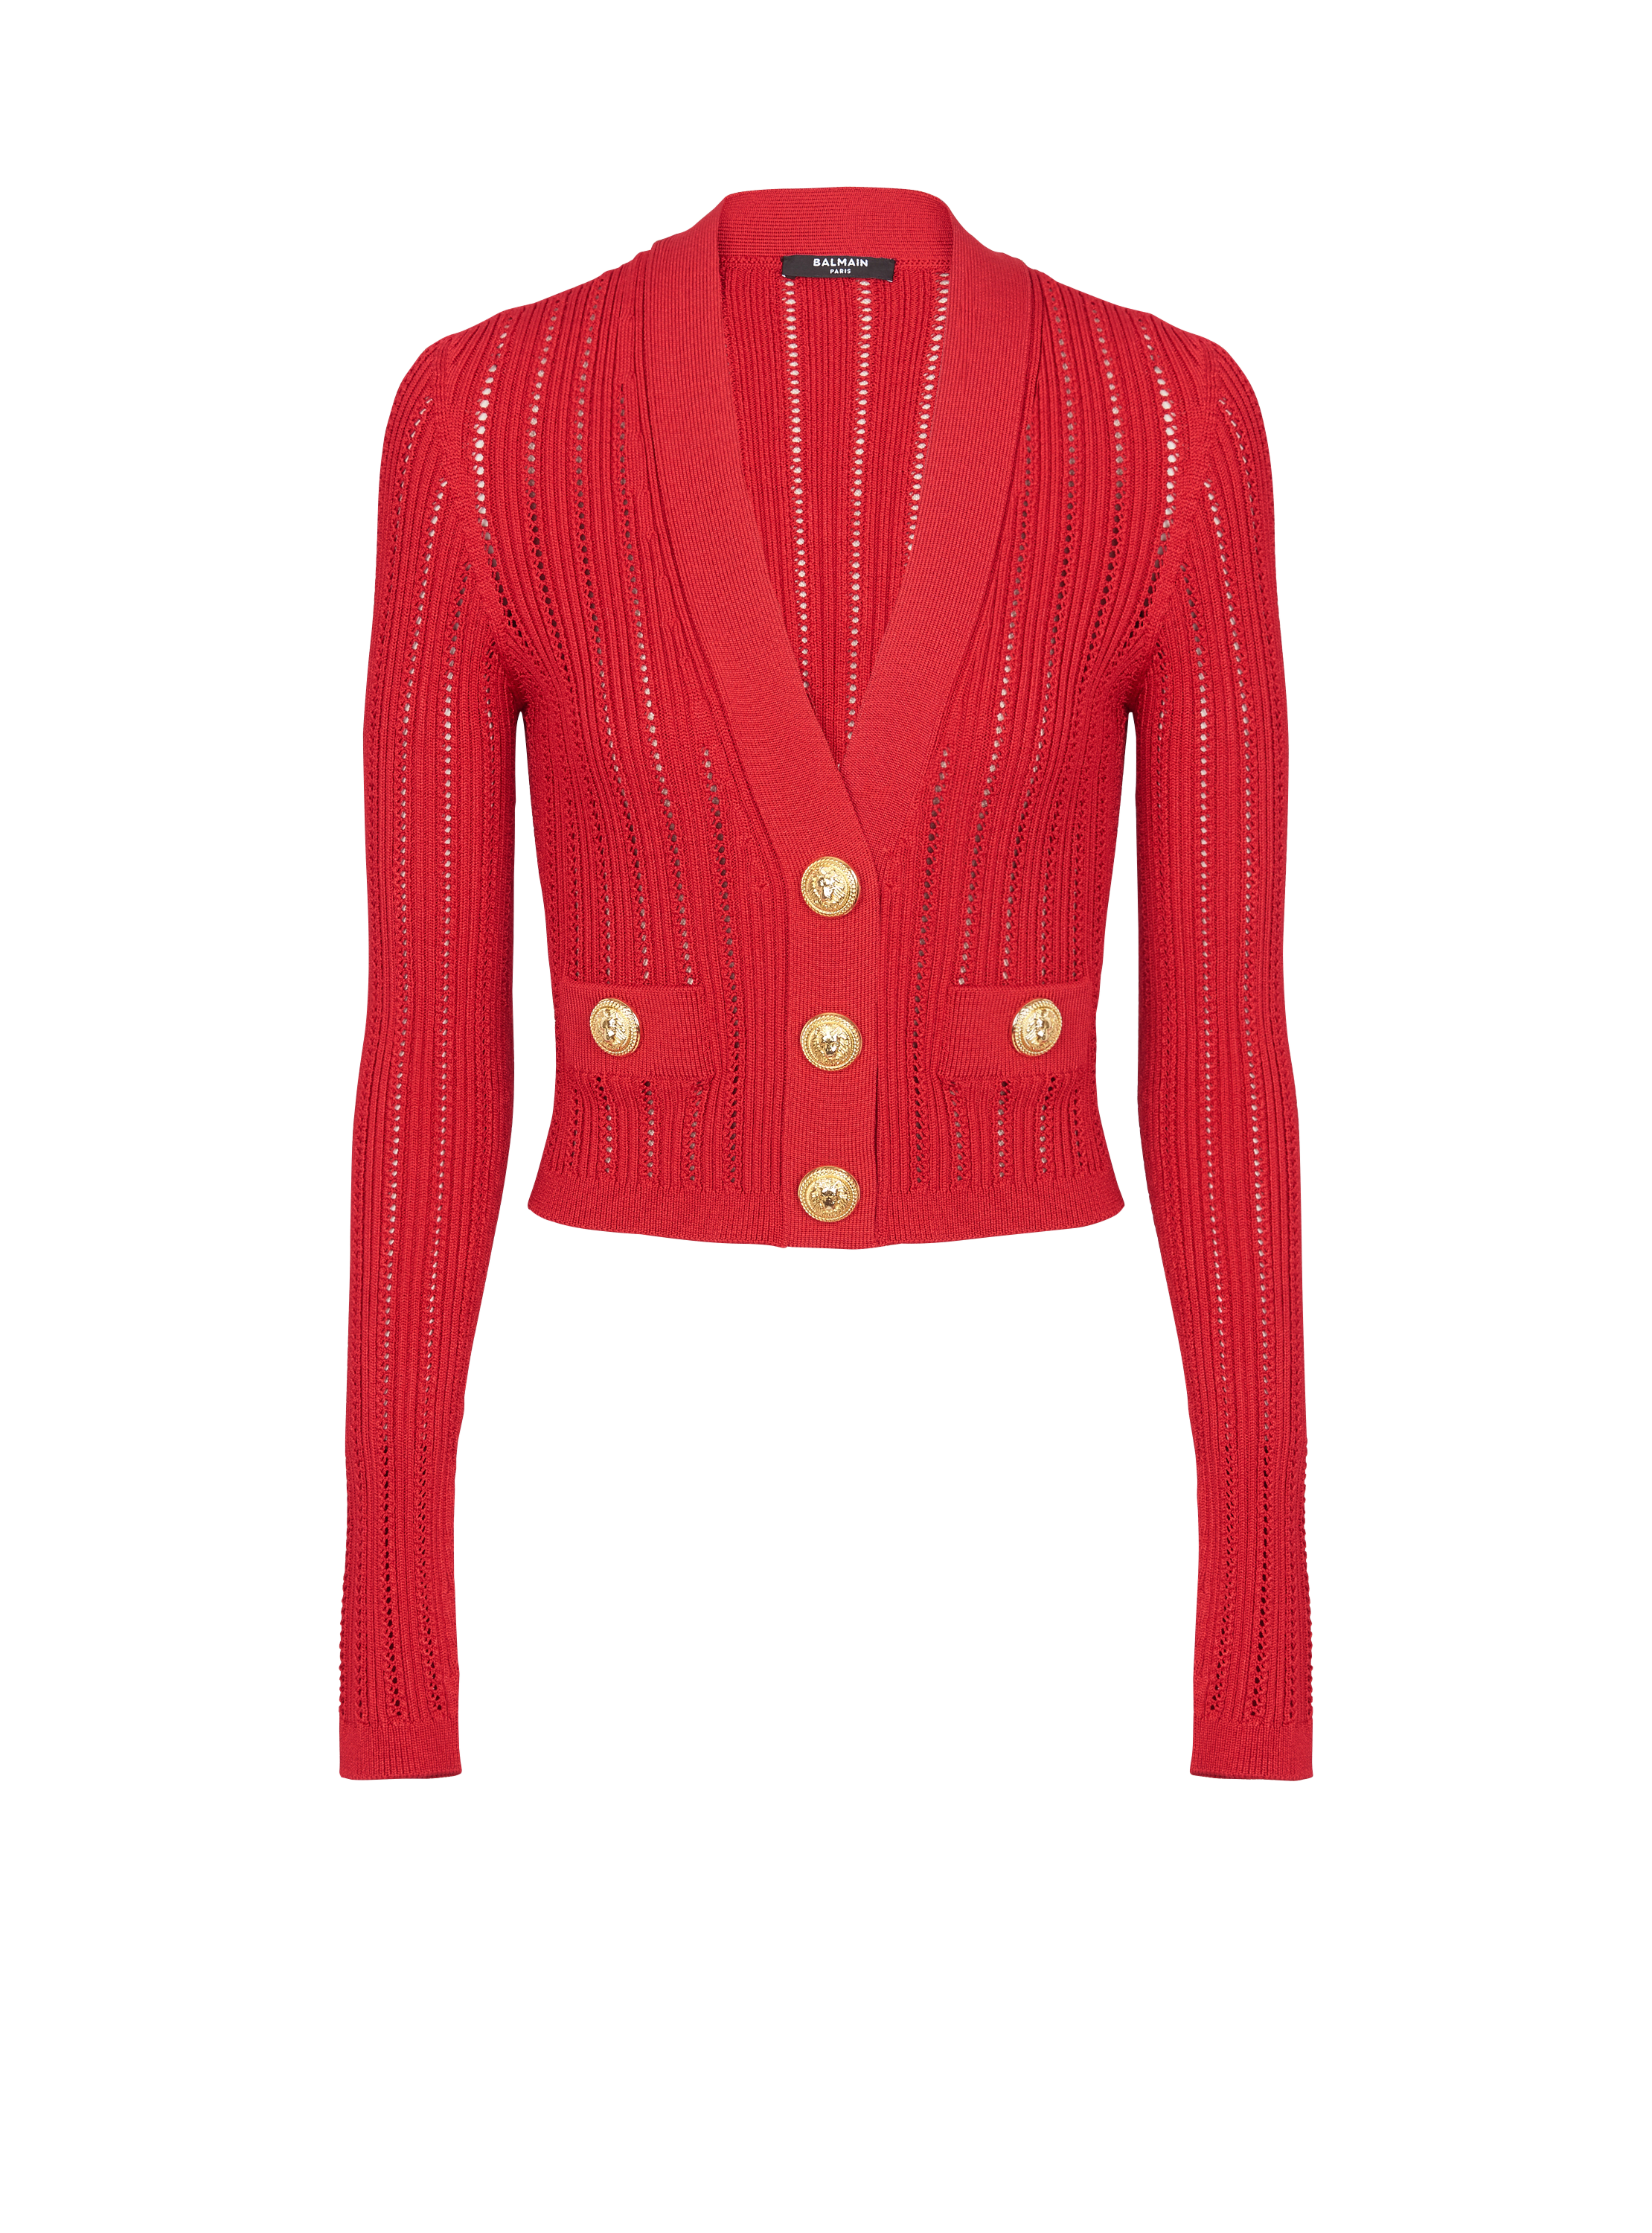 Cropped knit cardigan, red, hi-res